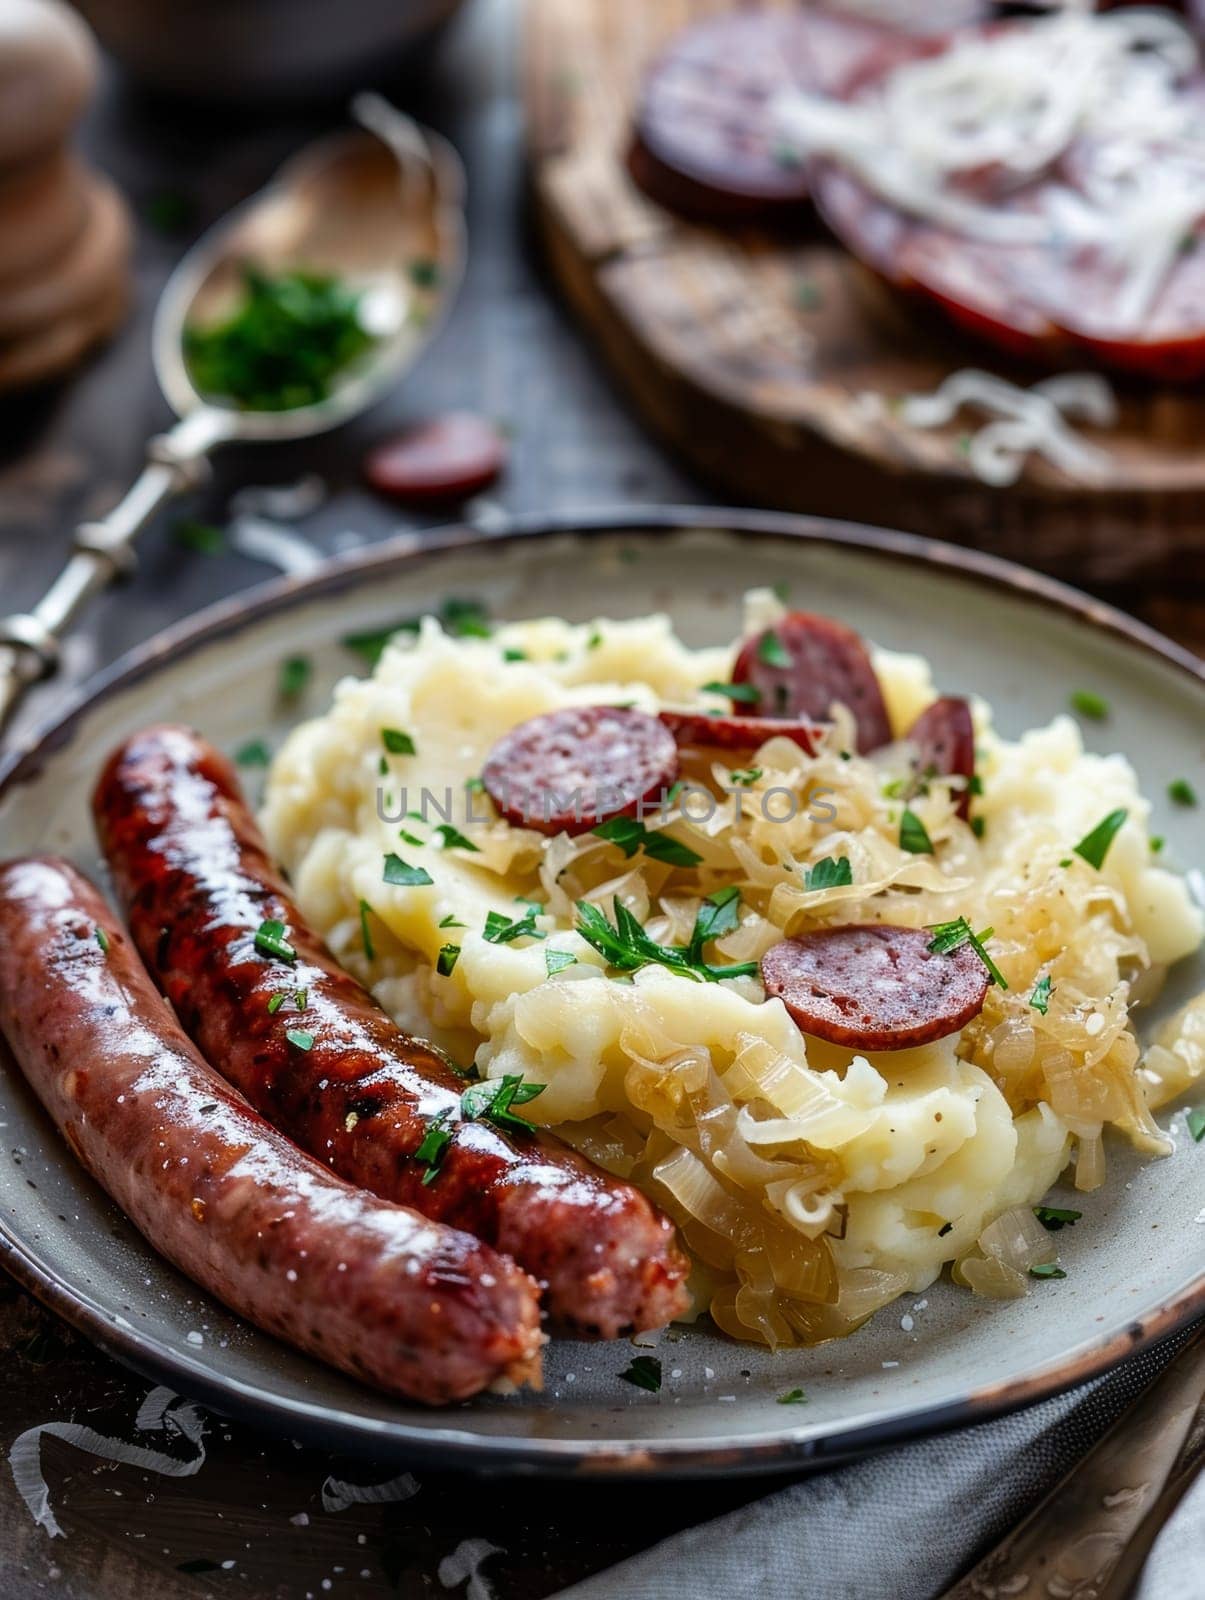 Traditional Dutch stamppot, a dish of mashed potatoes mixed with sauerkraut and smoked sausage, served on a plate. This hearty and comforting meal reflects the rich culinary traditions of Netherlands. by sfinks